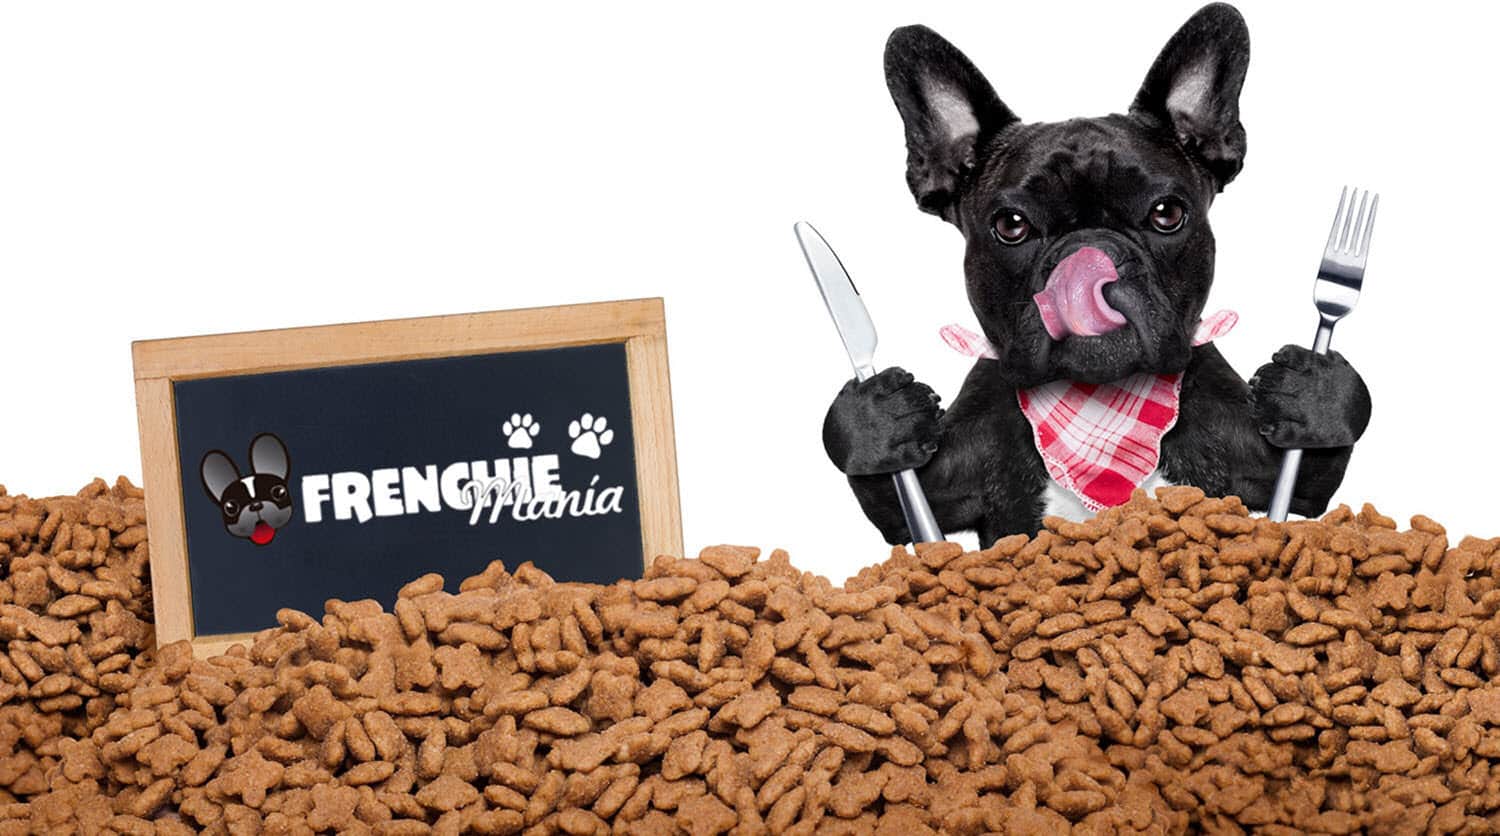 Top 12 Best Dog Food For French Bulldogs in 2021: Puppy ...